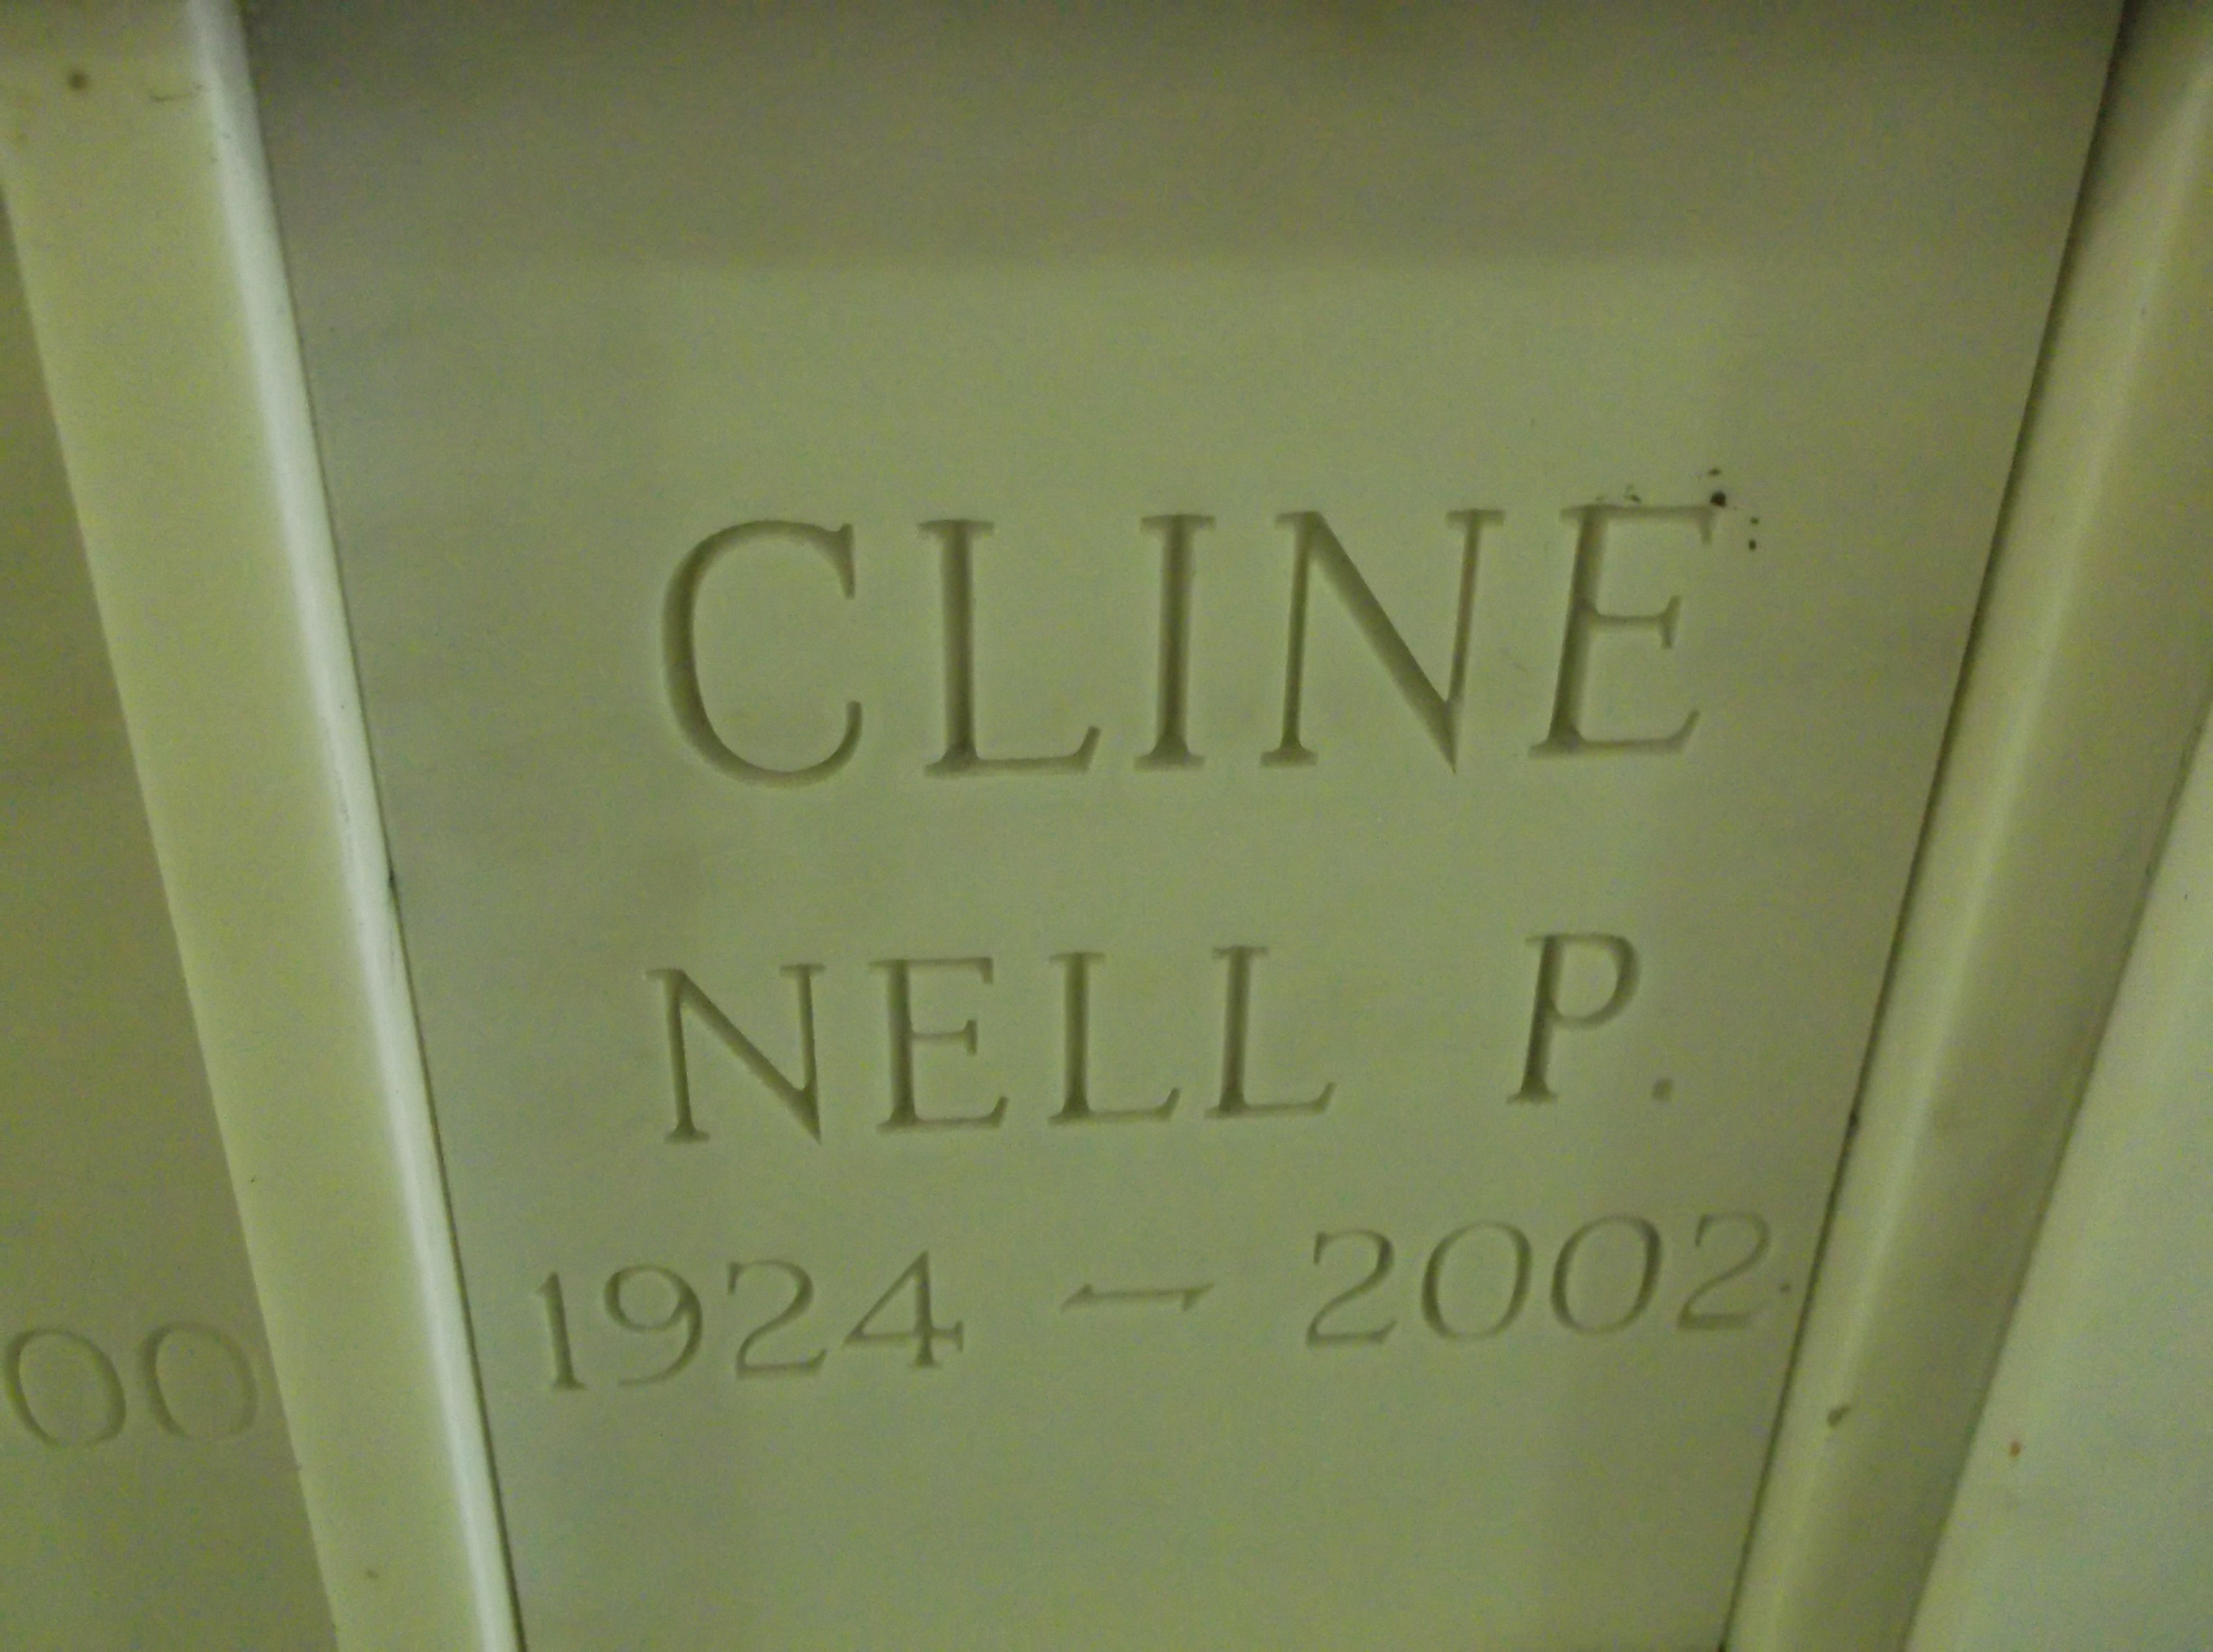 Nell P Cline